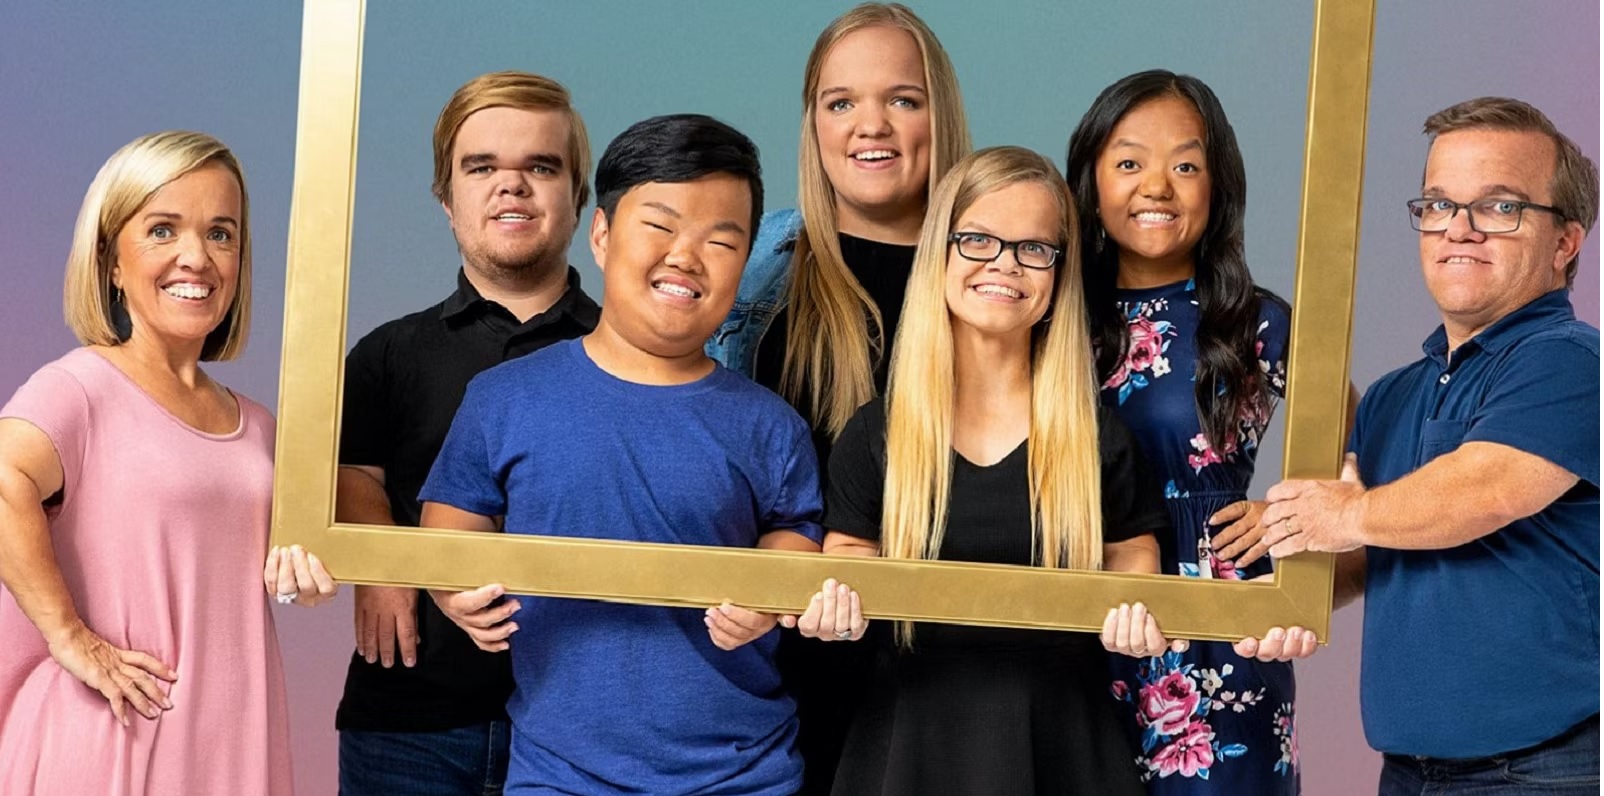 7 Little Johnstons Season 13 Episode 9 Release Date And When Is It